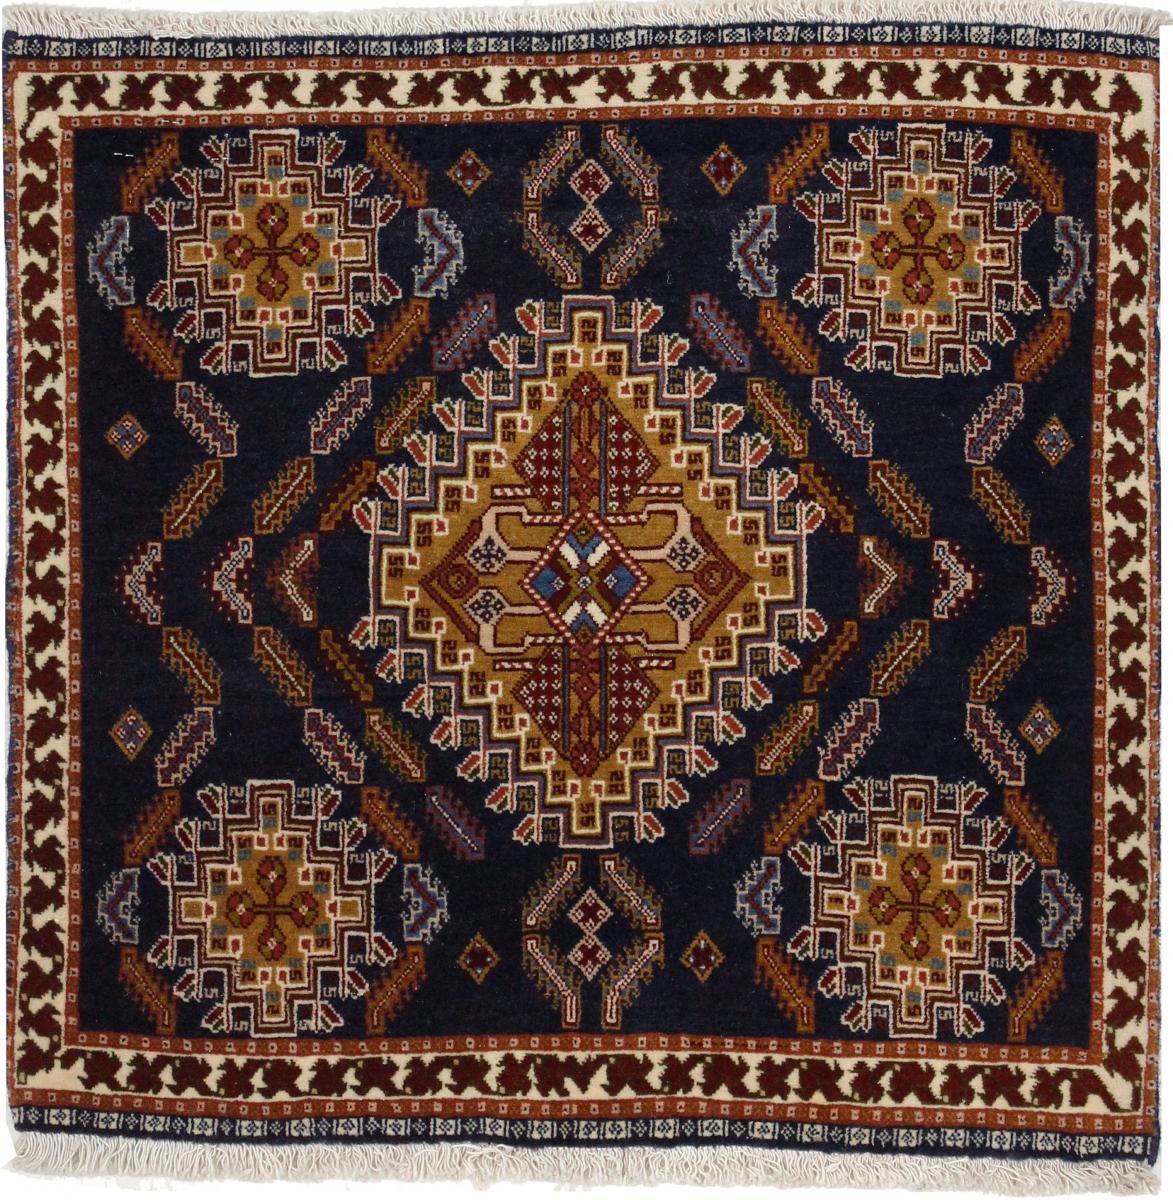 Persian Rug Ghashghai 64x61 64x61, Persian Rug Knotted by hand